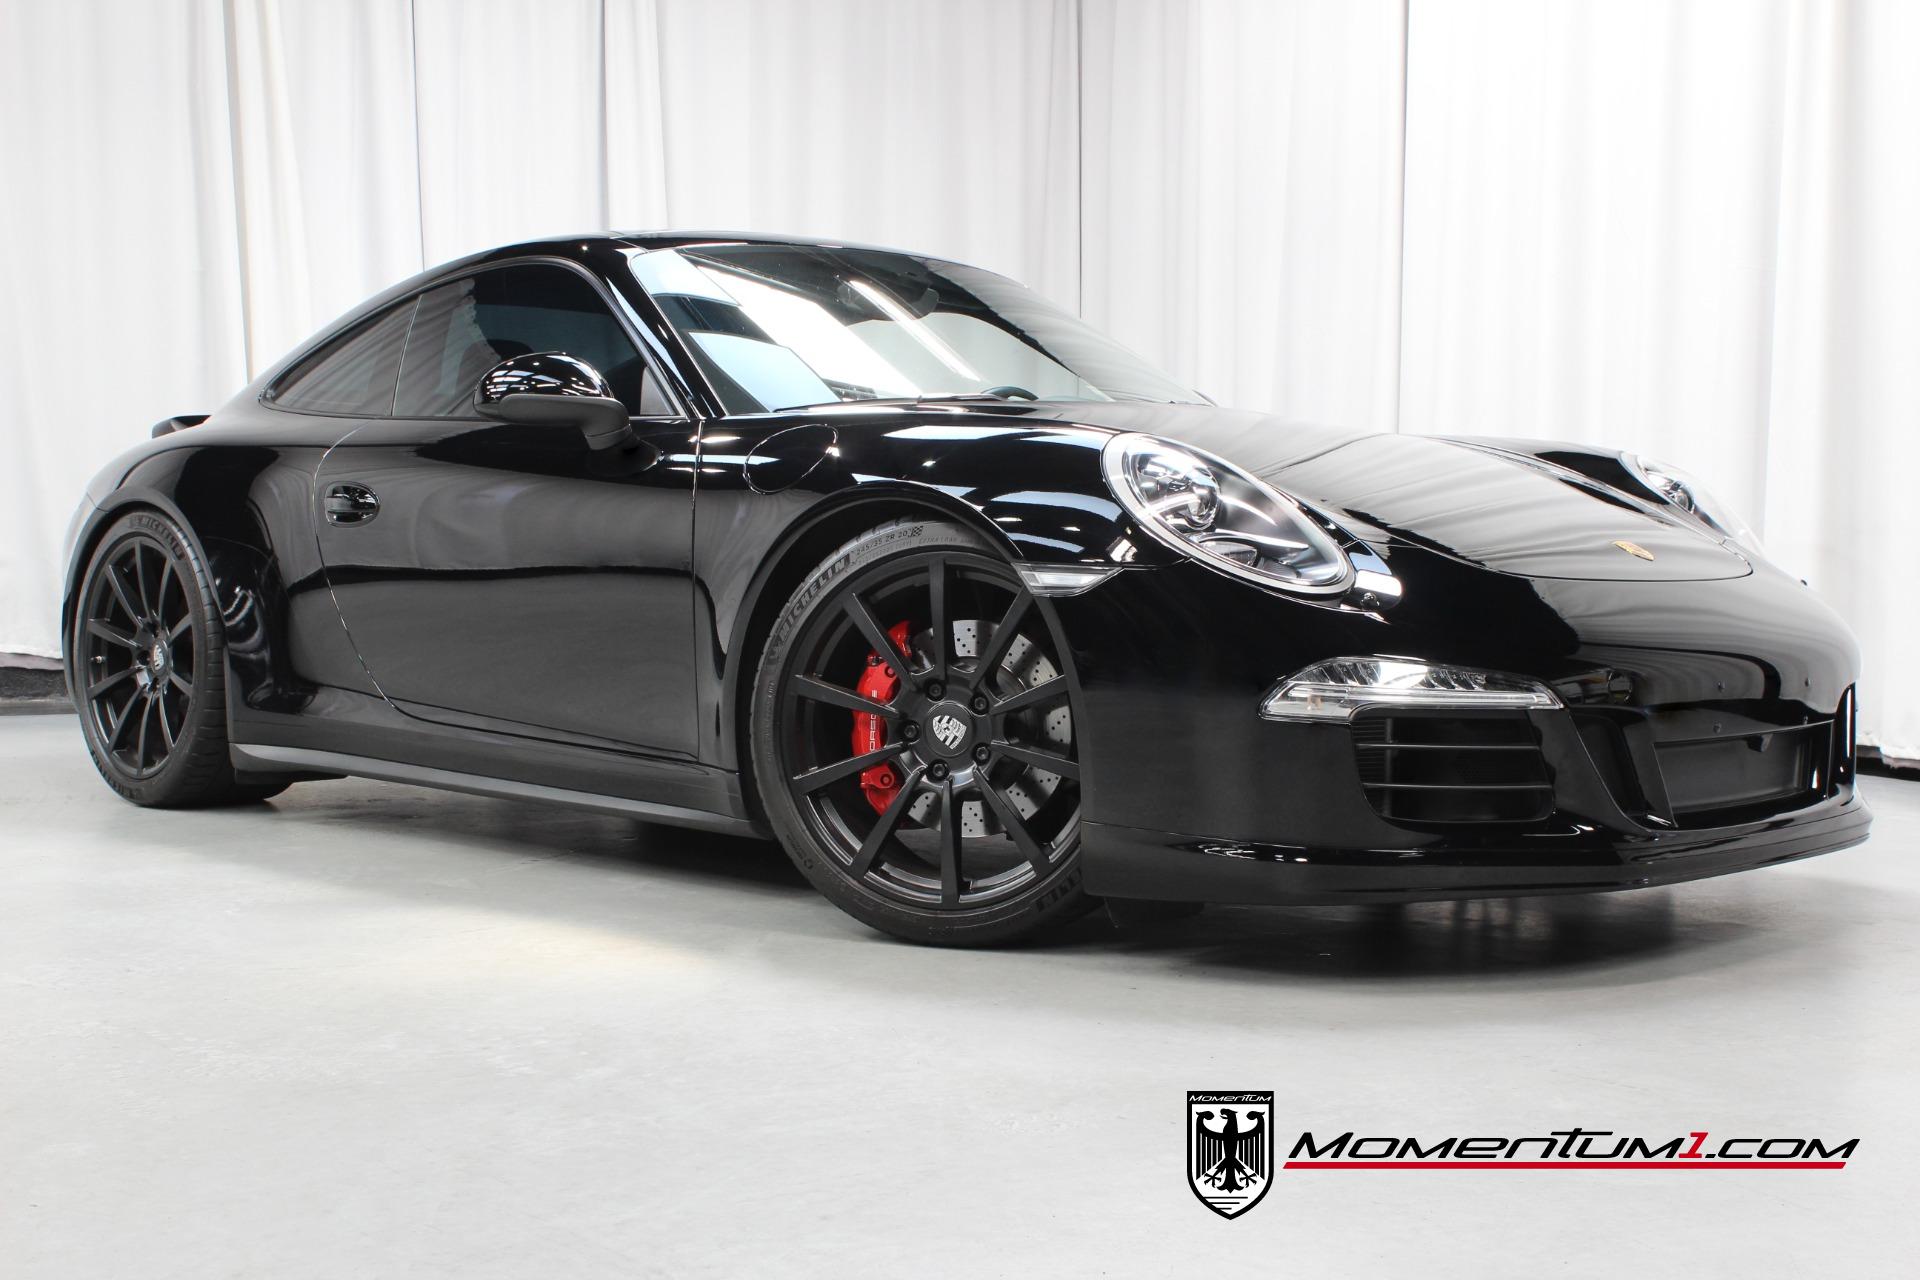 Used 2013 Porsche 911 Carrera 4S With SportDesign Package For Sale (Sold) |  Momentum Motorcars Inc Stock #122096